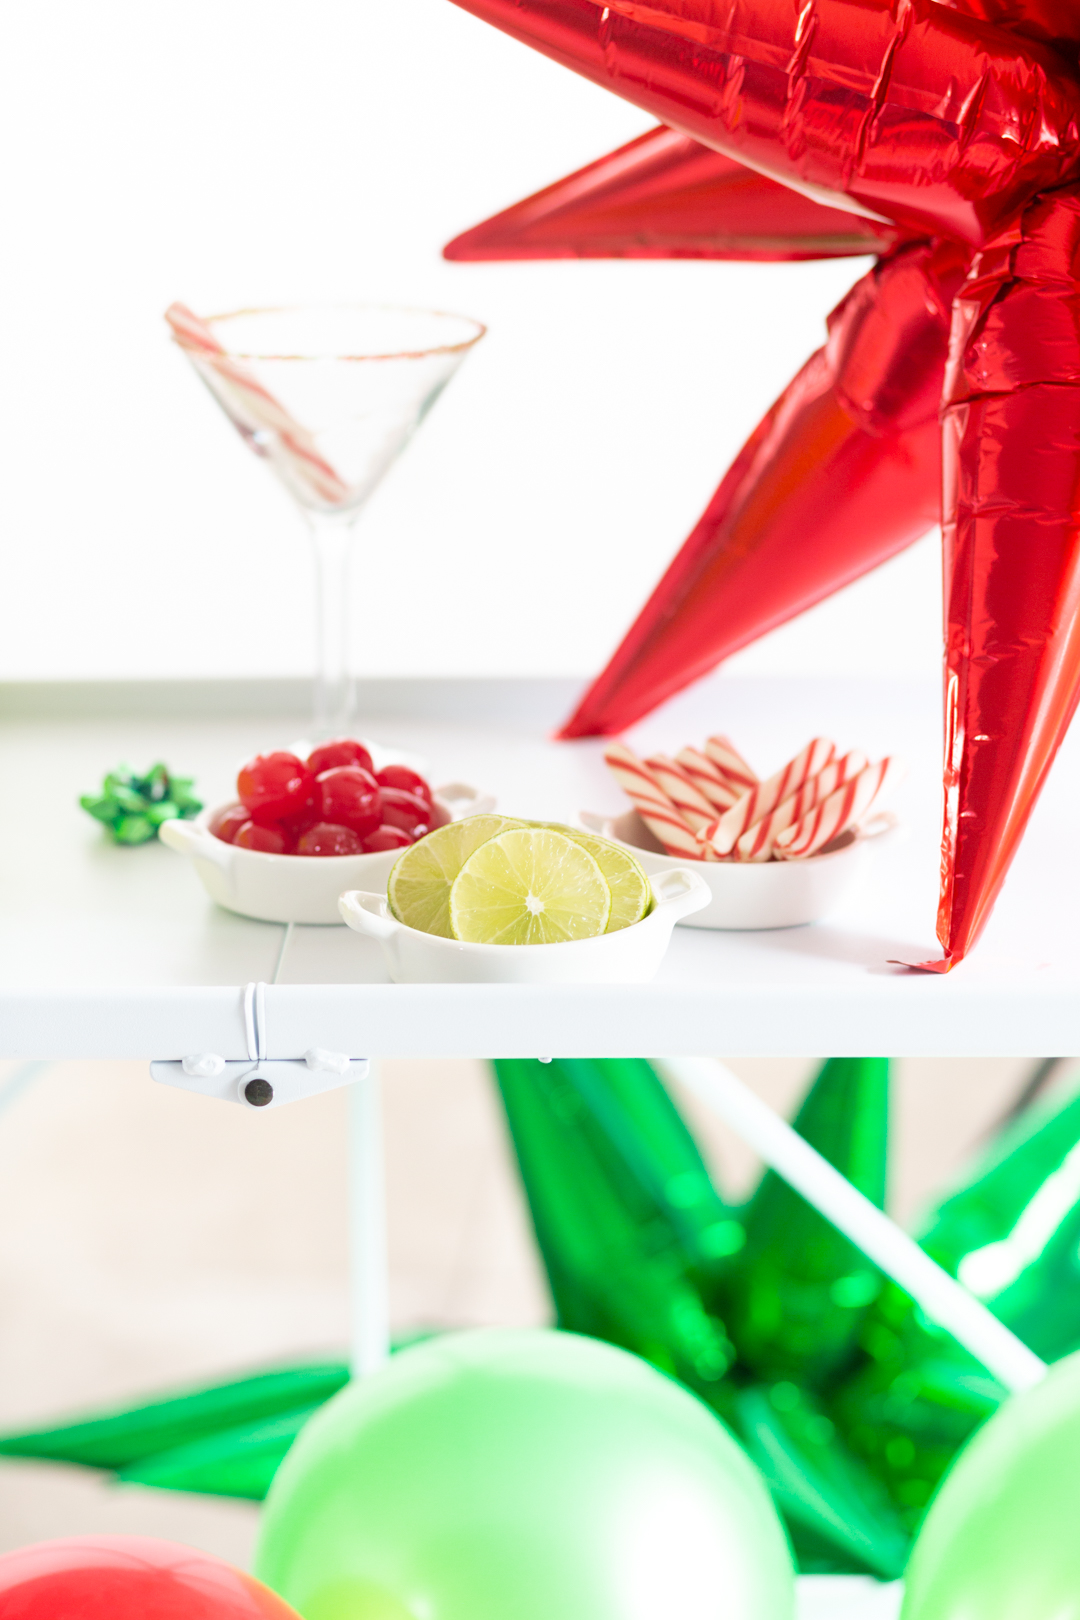 white bar cart with drink garnishes lined up in small white dishes. cocktail glass with sprinkles around the rim in the background. small green bow for decoration on the cart. Large starburst balloons in red and green.